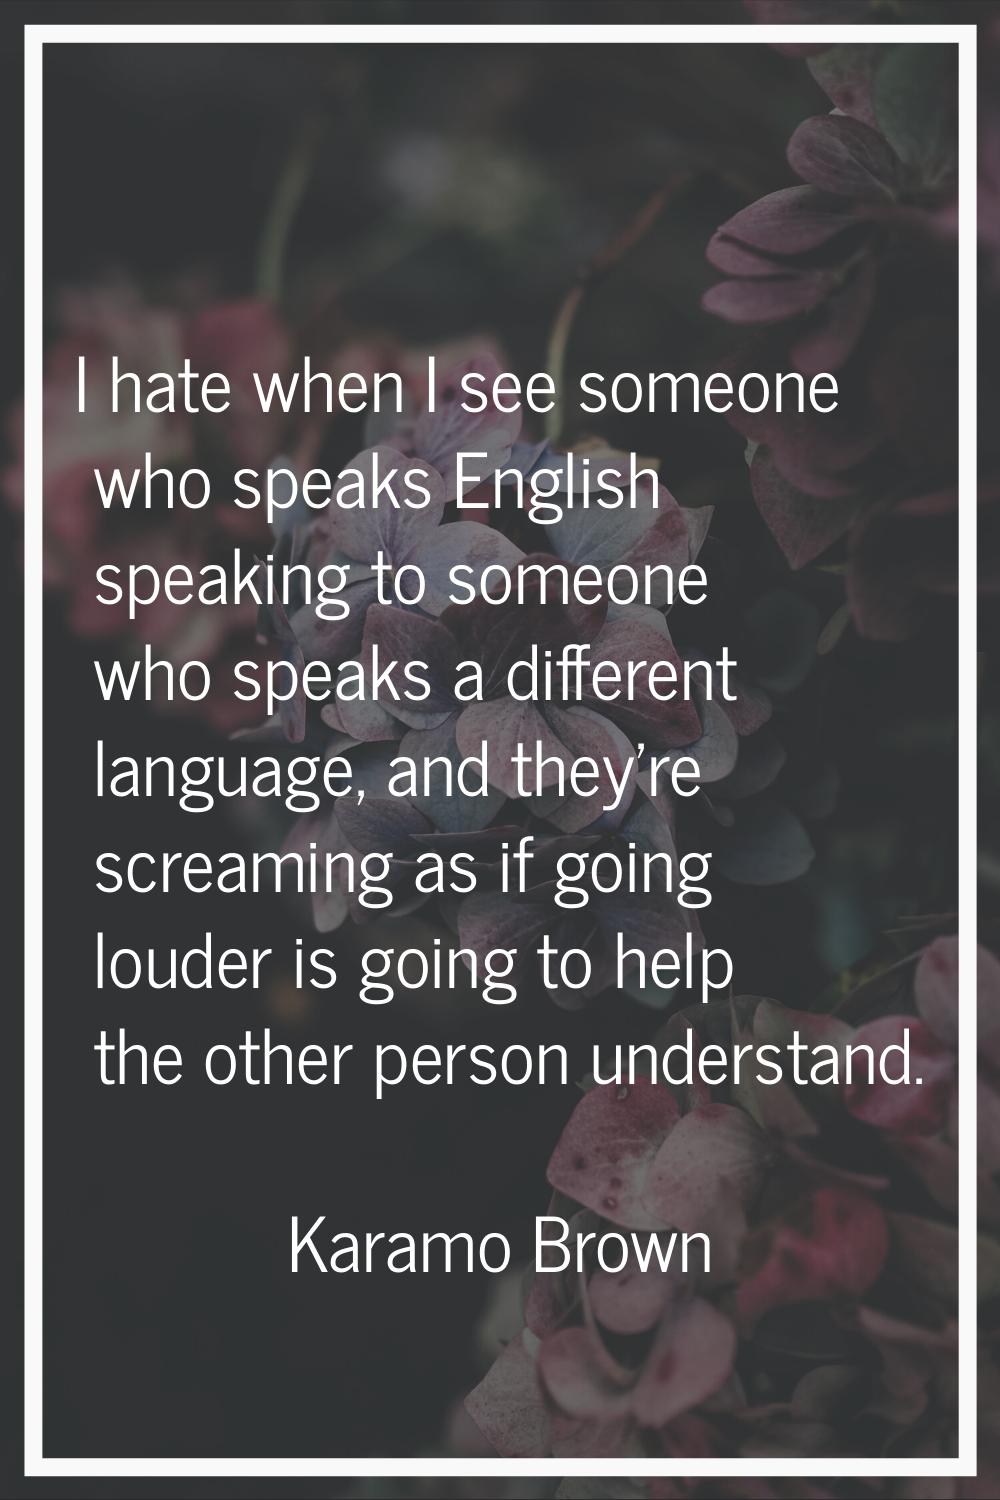 I hate when I see someone who speaks English speaking to someone who speaks a different language, a